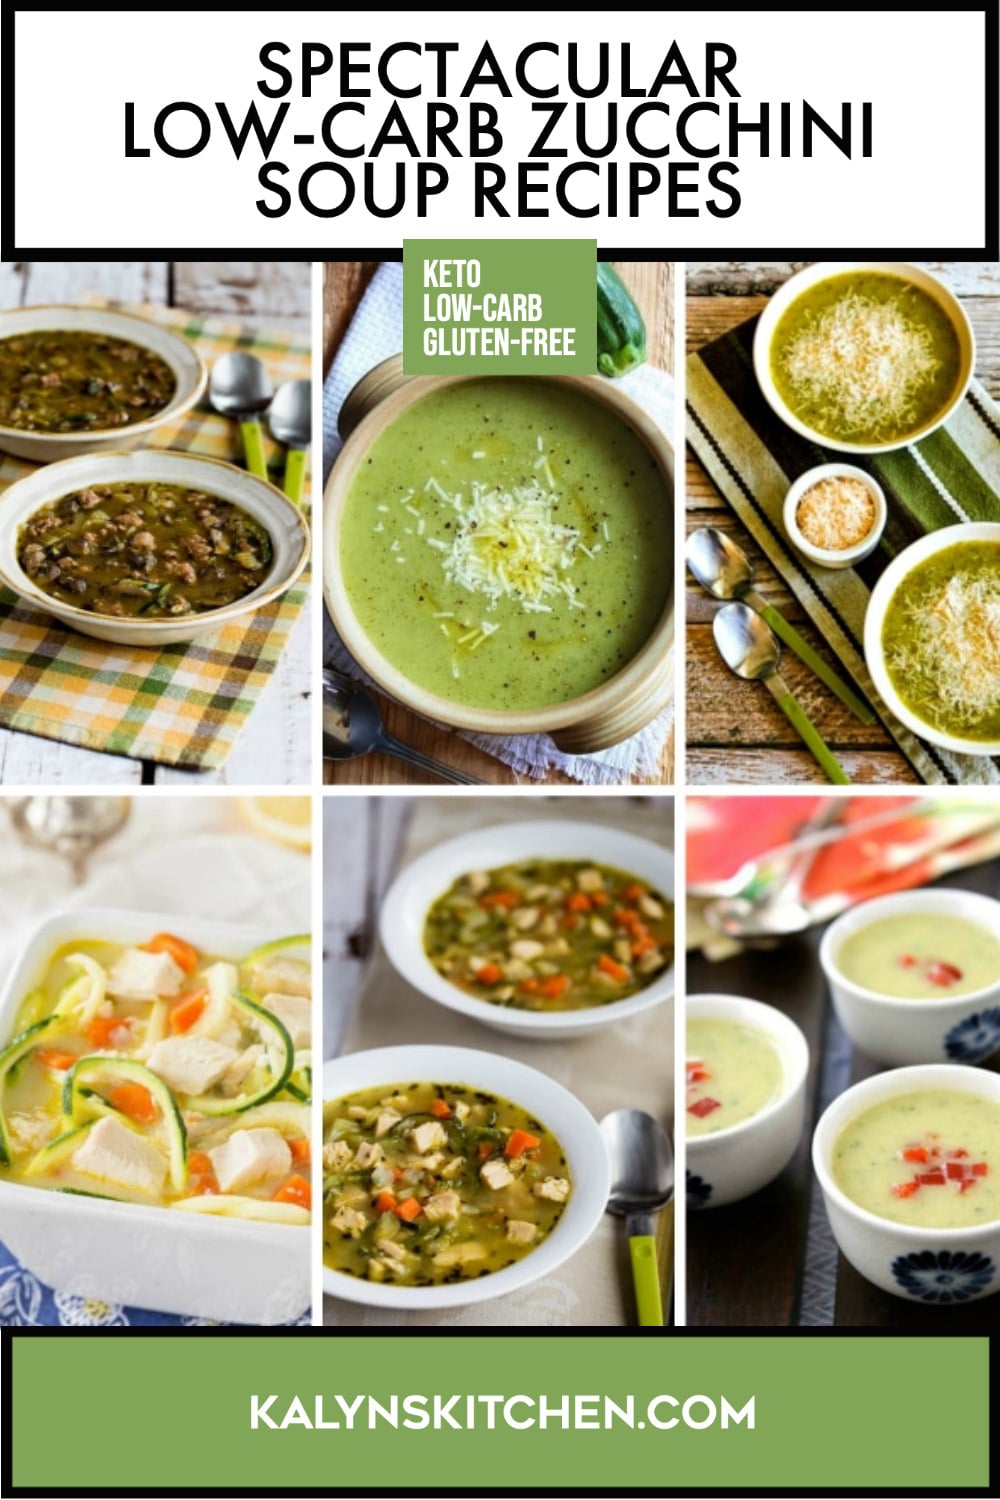 Pinterest image of Spectacular Low-Carb Zucchini Soup Recipes